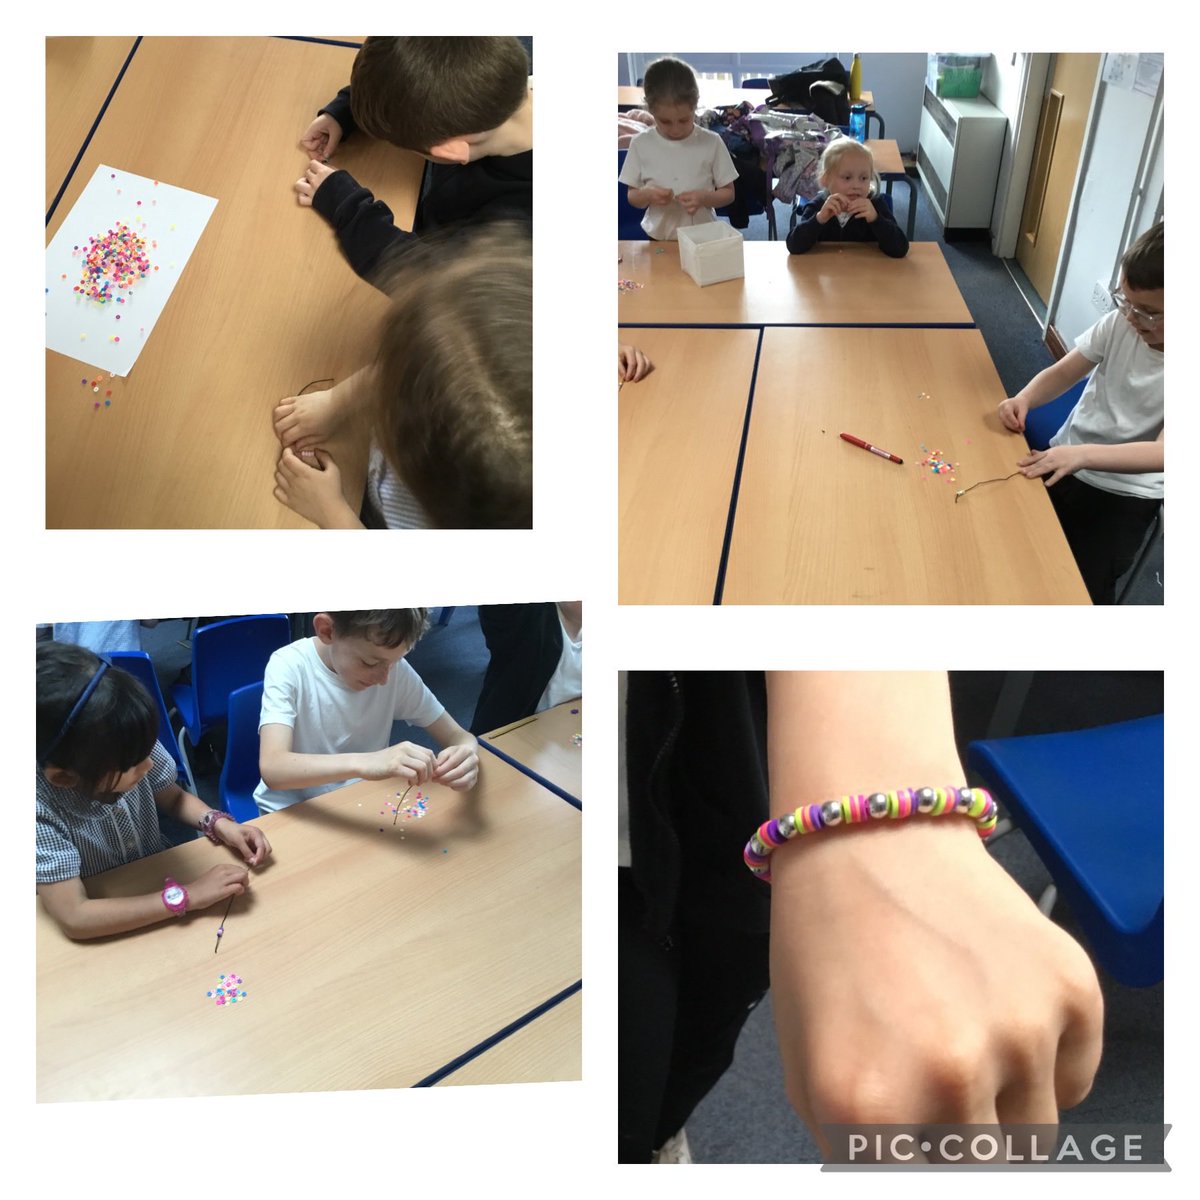 In well being club tonight, we made our own friendships bracelets. It was lovely to concentrate on making something beautiful. #TPA #wellbeingwednesday